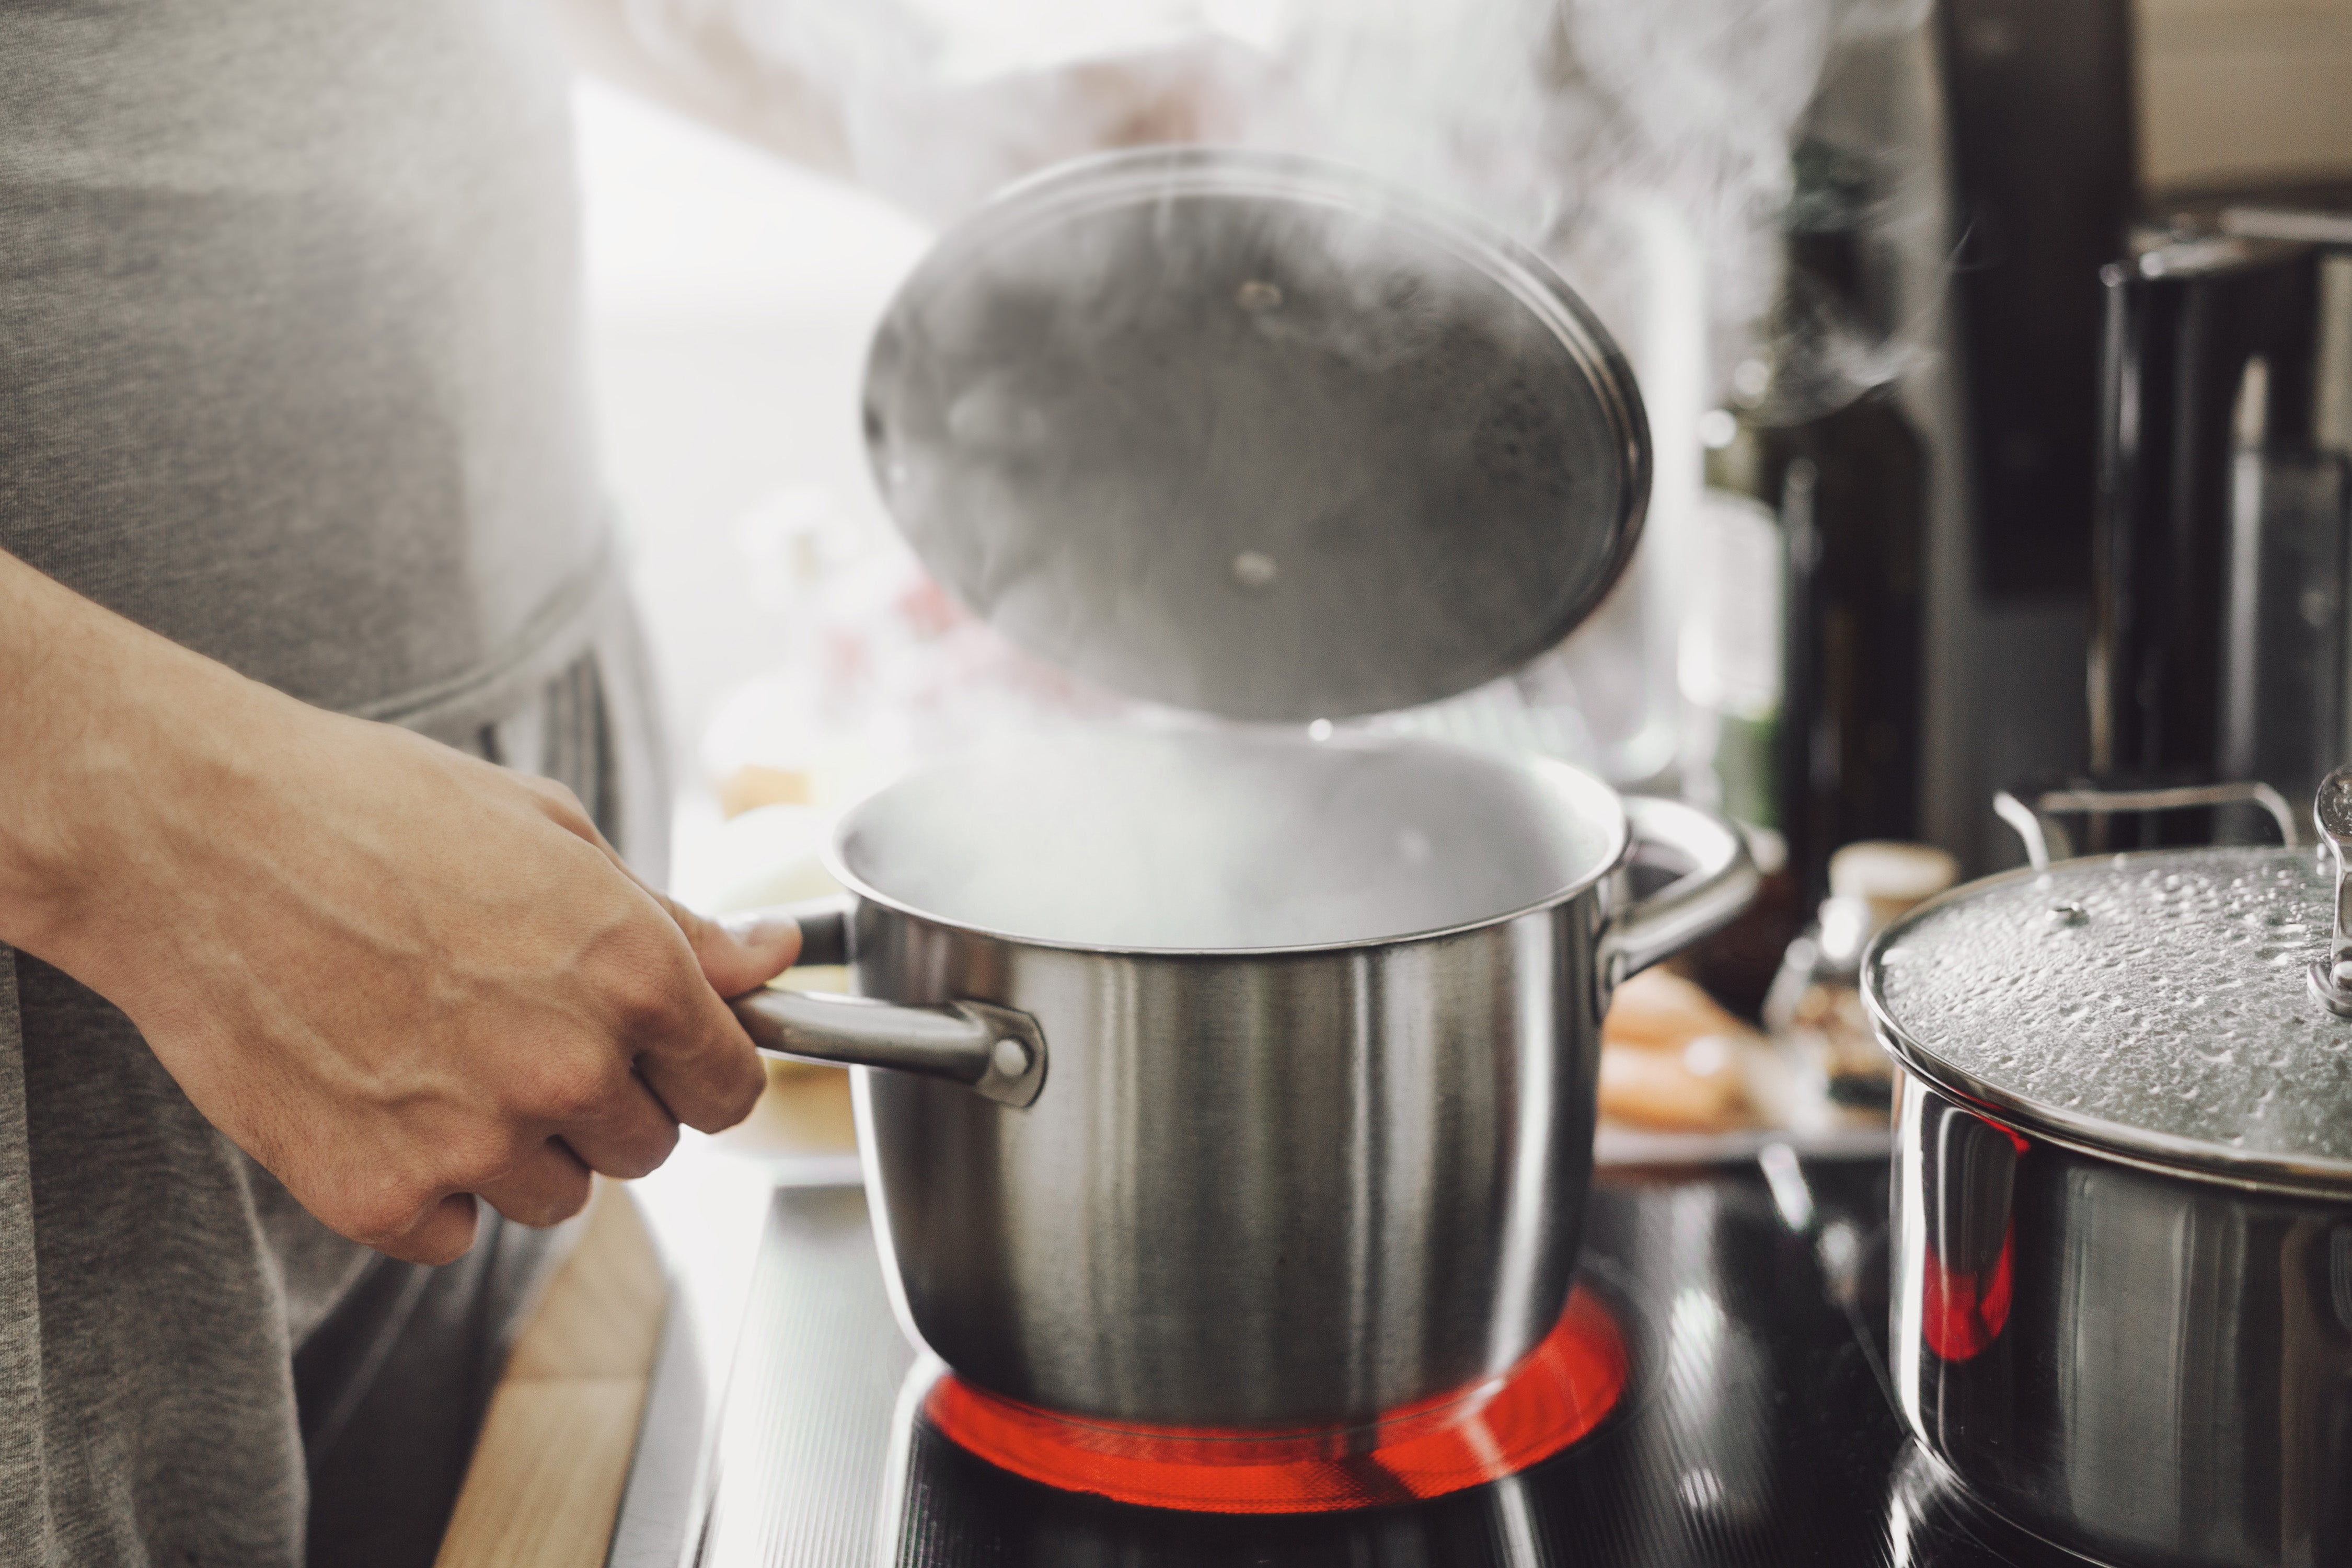 Tips for Steaming Food Right